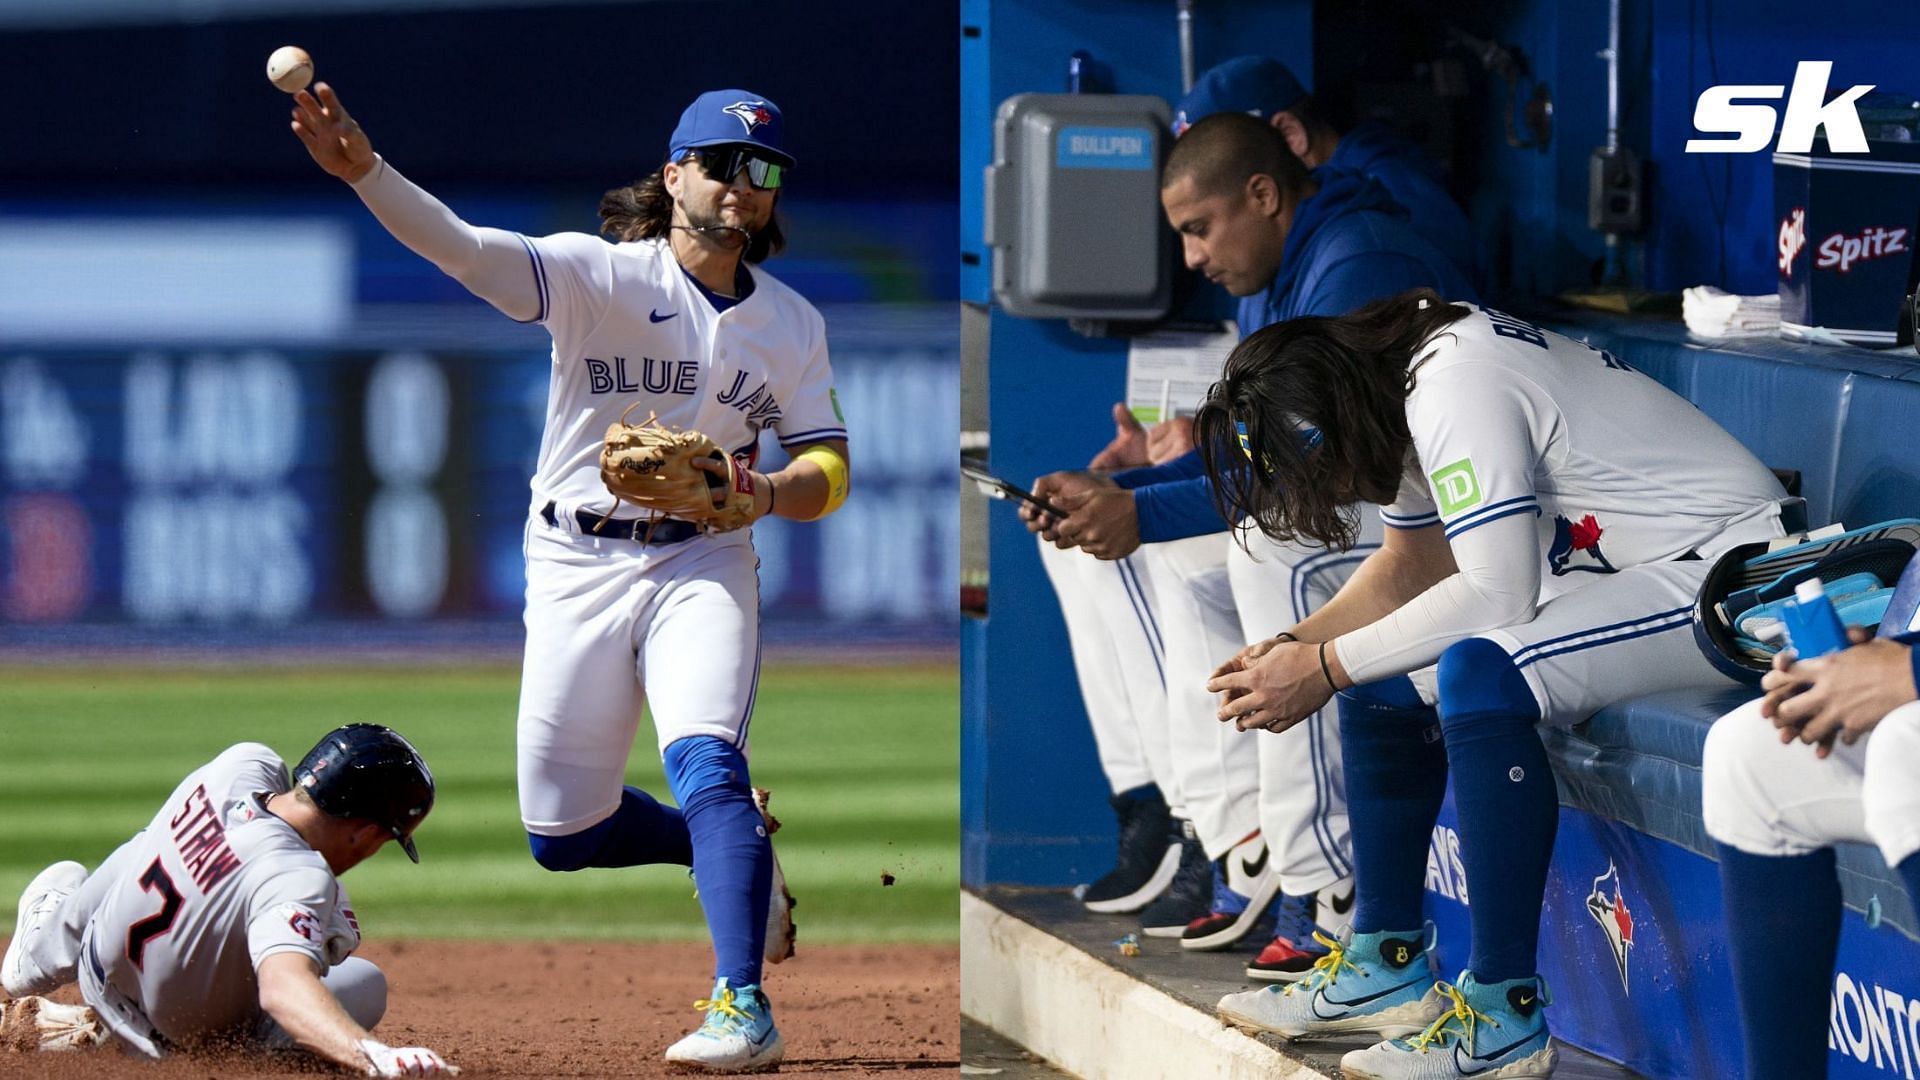 Bo Bichette has been linked in trade rumors to the Chicago Cubs